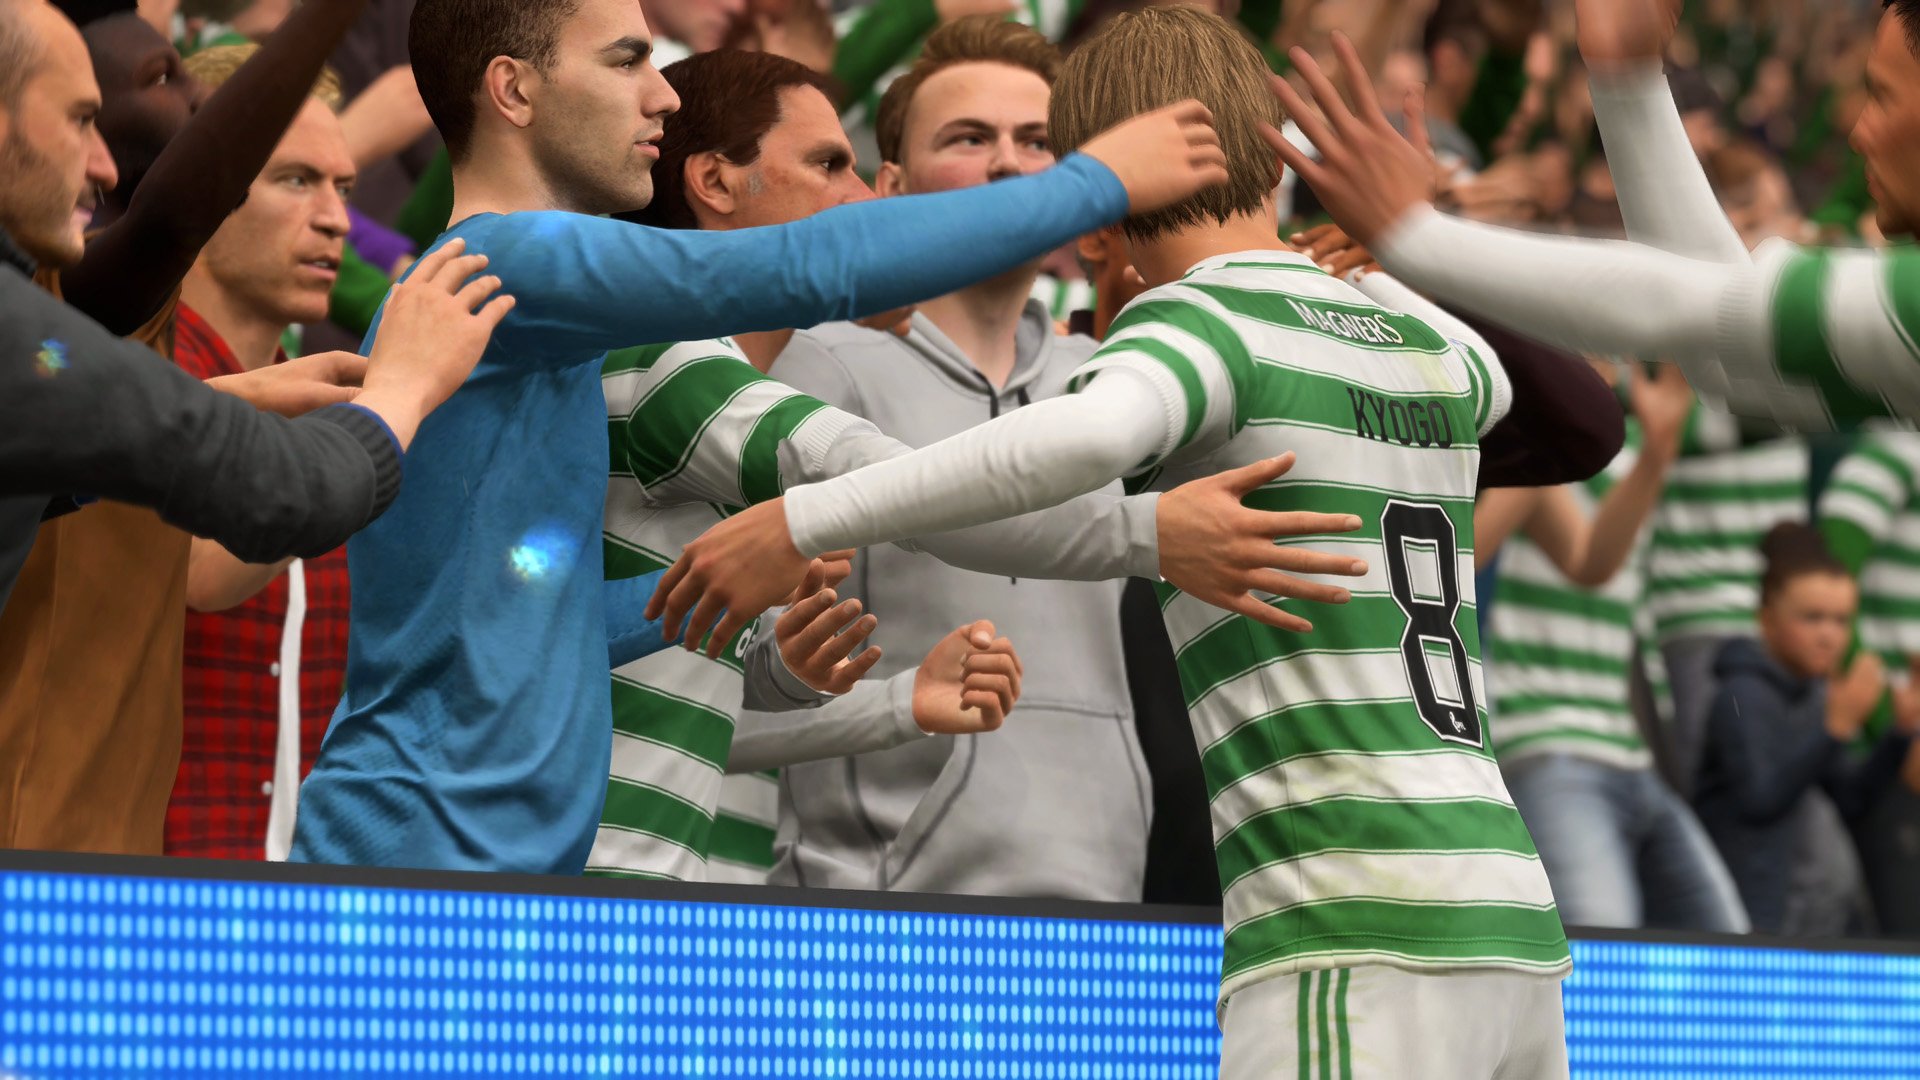 Crossplay Reportedly Coming To FIFA 23